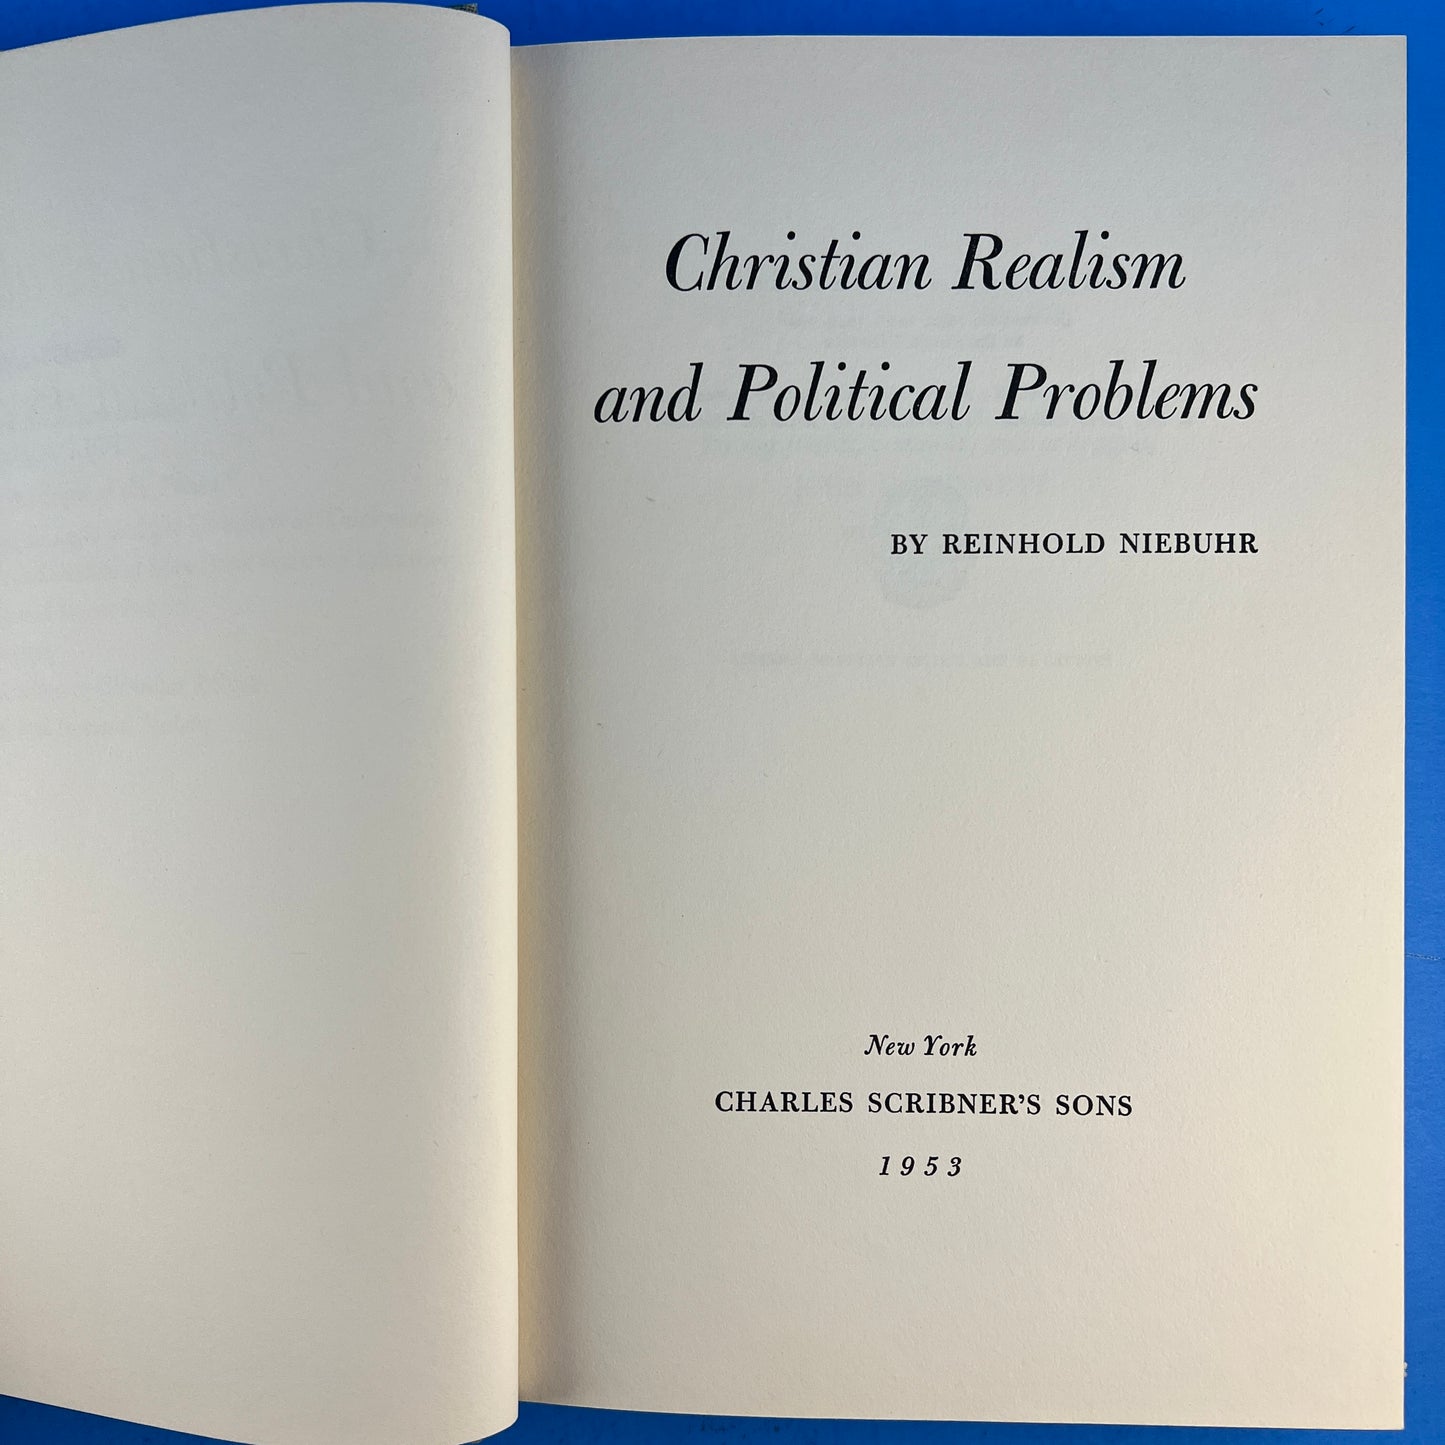 Christian Realism and Political Problems